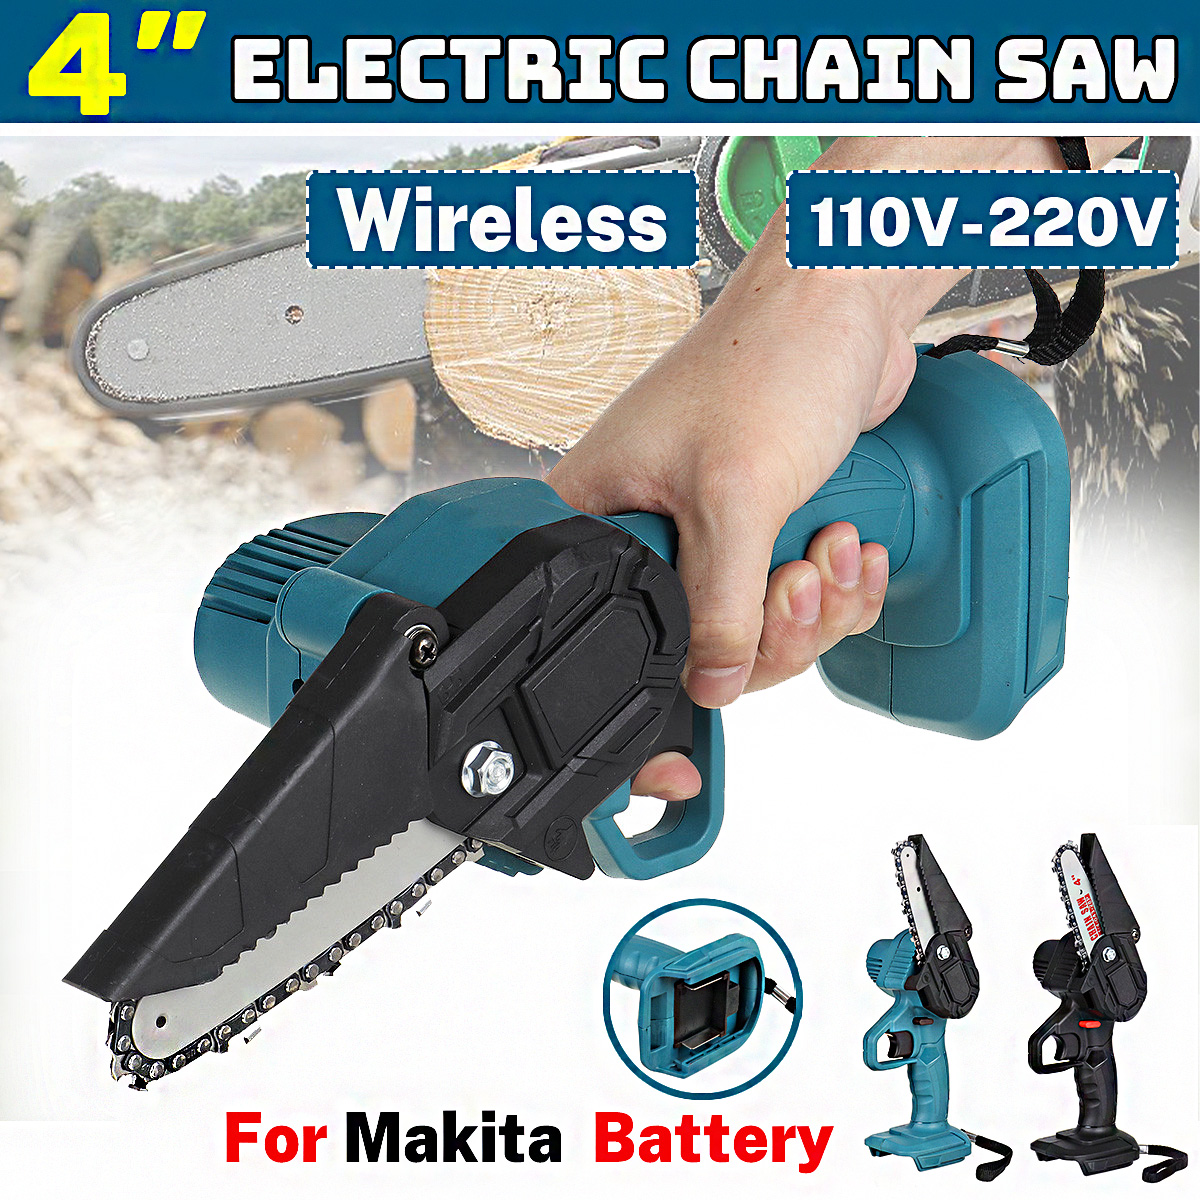 4-Inch-Portable-Electric-Chain-Saws-Woodworking-Tool-Wood-Saw-Cutter-Chainsaw-For-Makita-18V-Battery-1848662-1